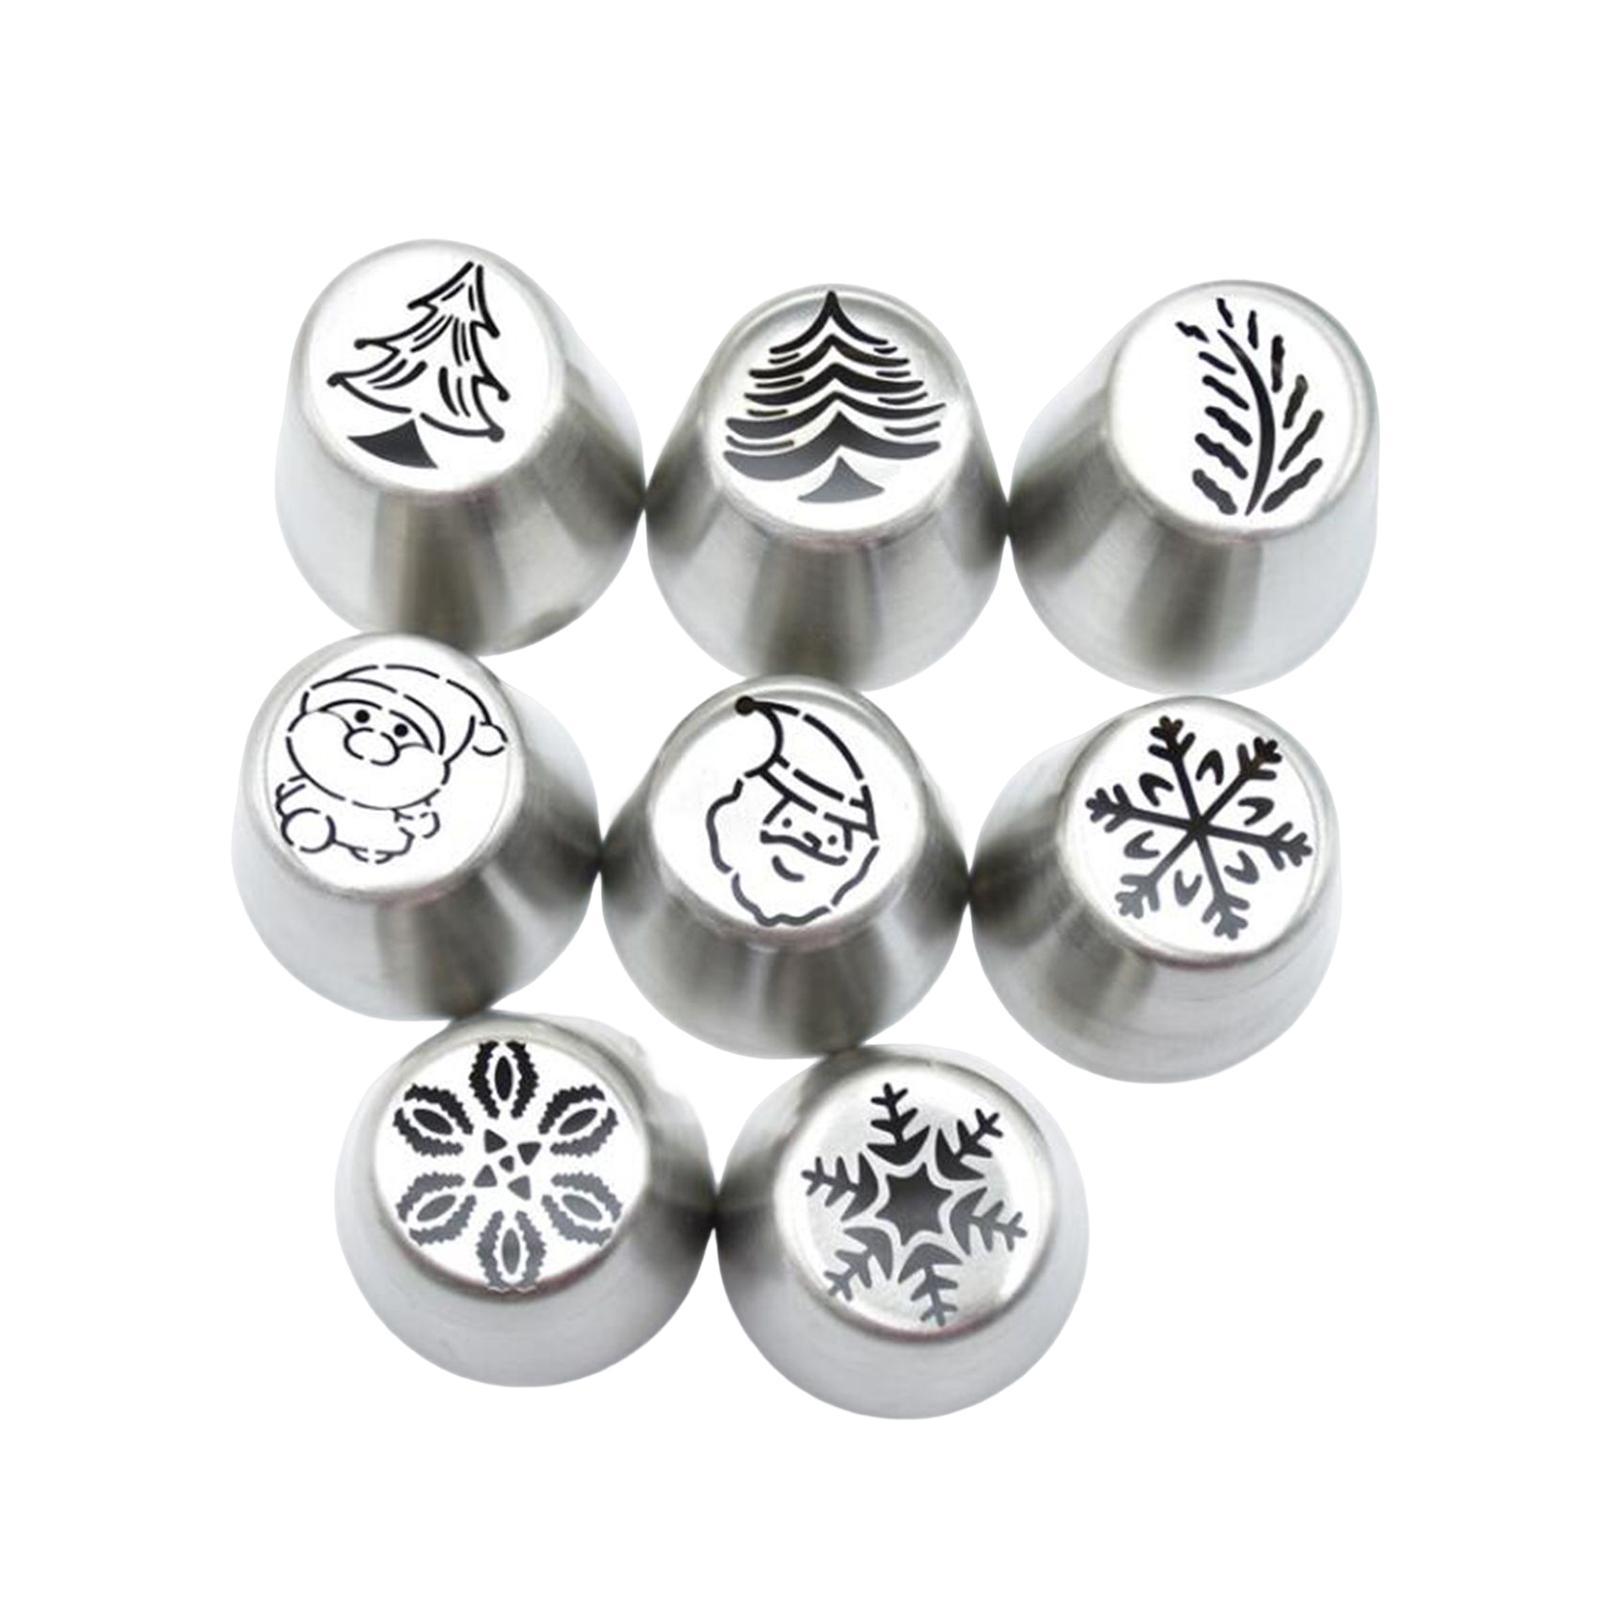 8x Professional Piping Tips Kit Icing Piping Nozzle Tip Set Cake ...